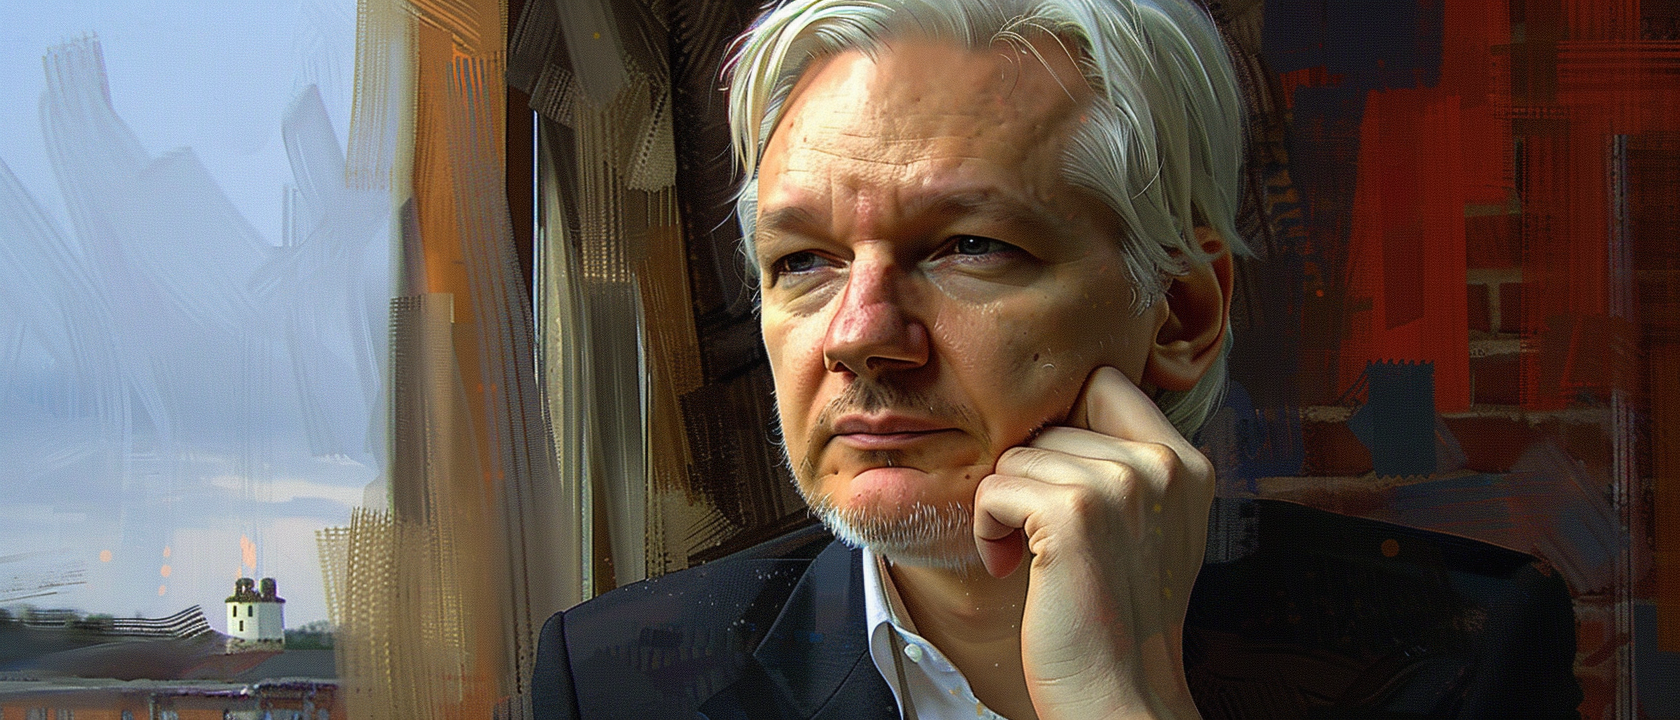 U.S. Assures No Death Penalty for Julian Assange If He's Extradited